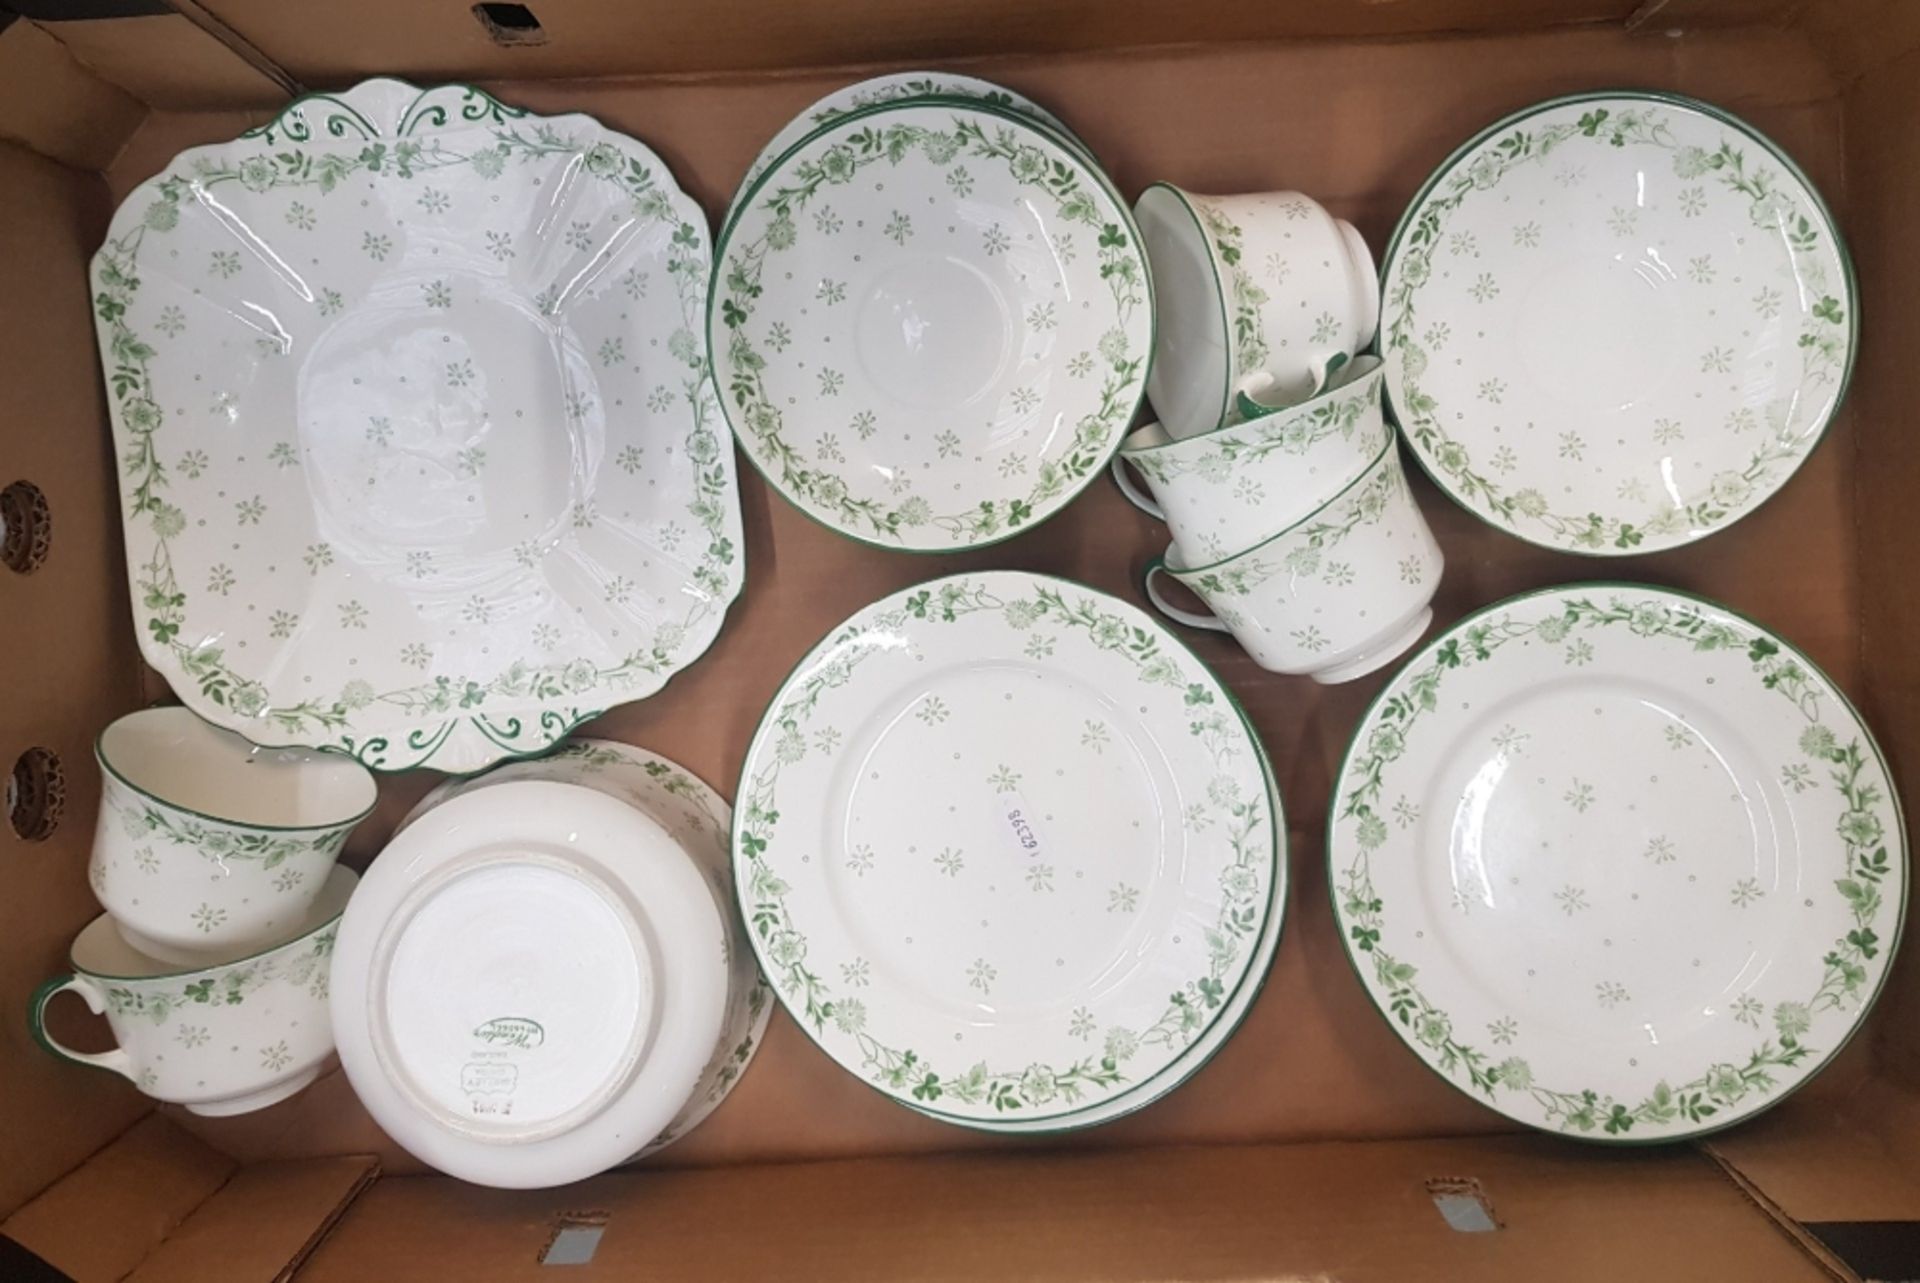 Shelley 'Windsor' patterned tea ware items 5 cups, 11 saucers, 10 side plates, cake plate and a